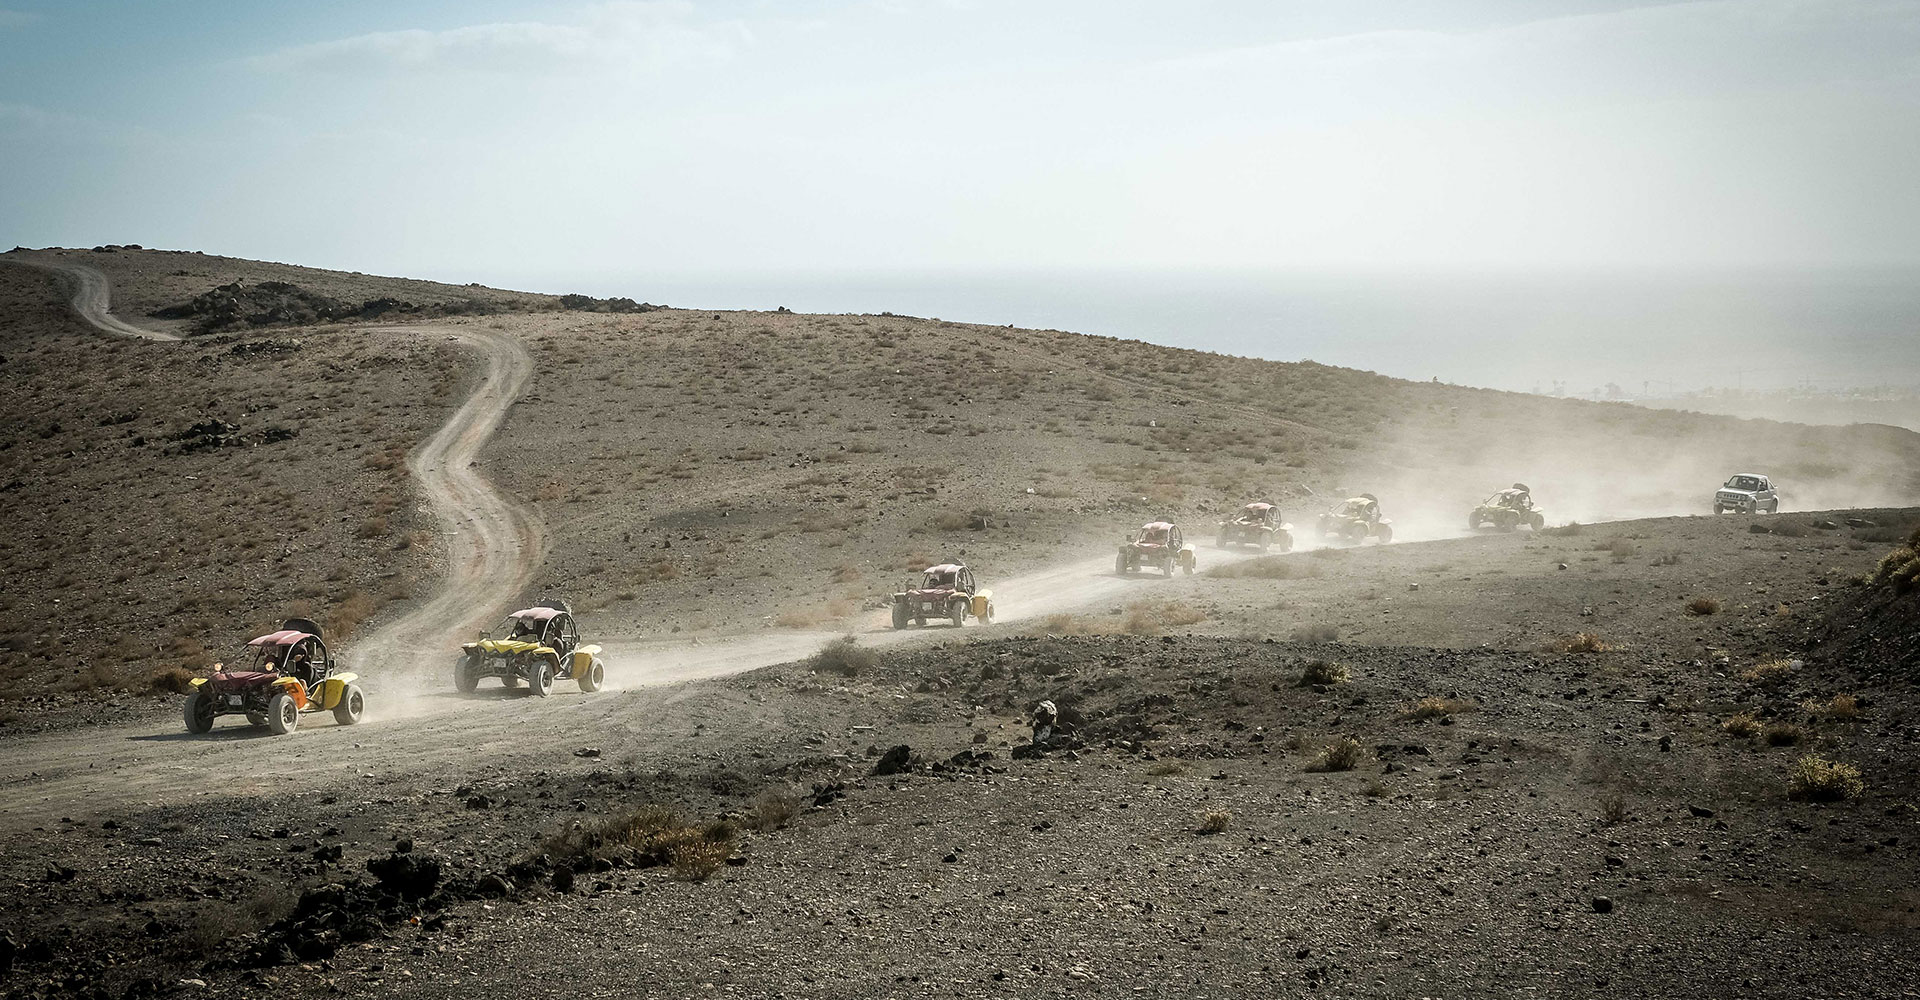 Beach buggy safari on the volcanic terrain of the Canary Islands in Lanzarote.